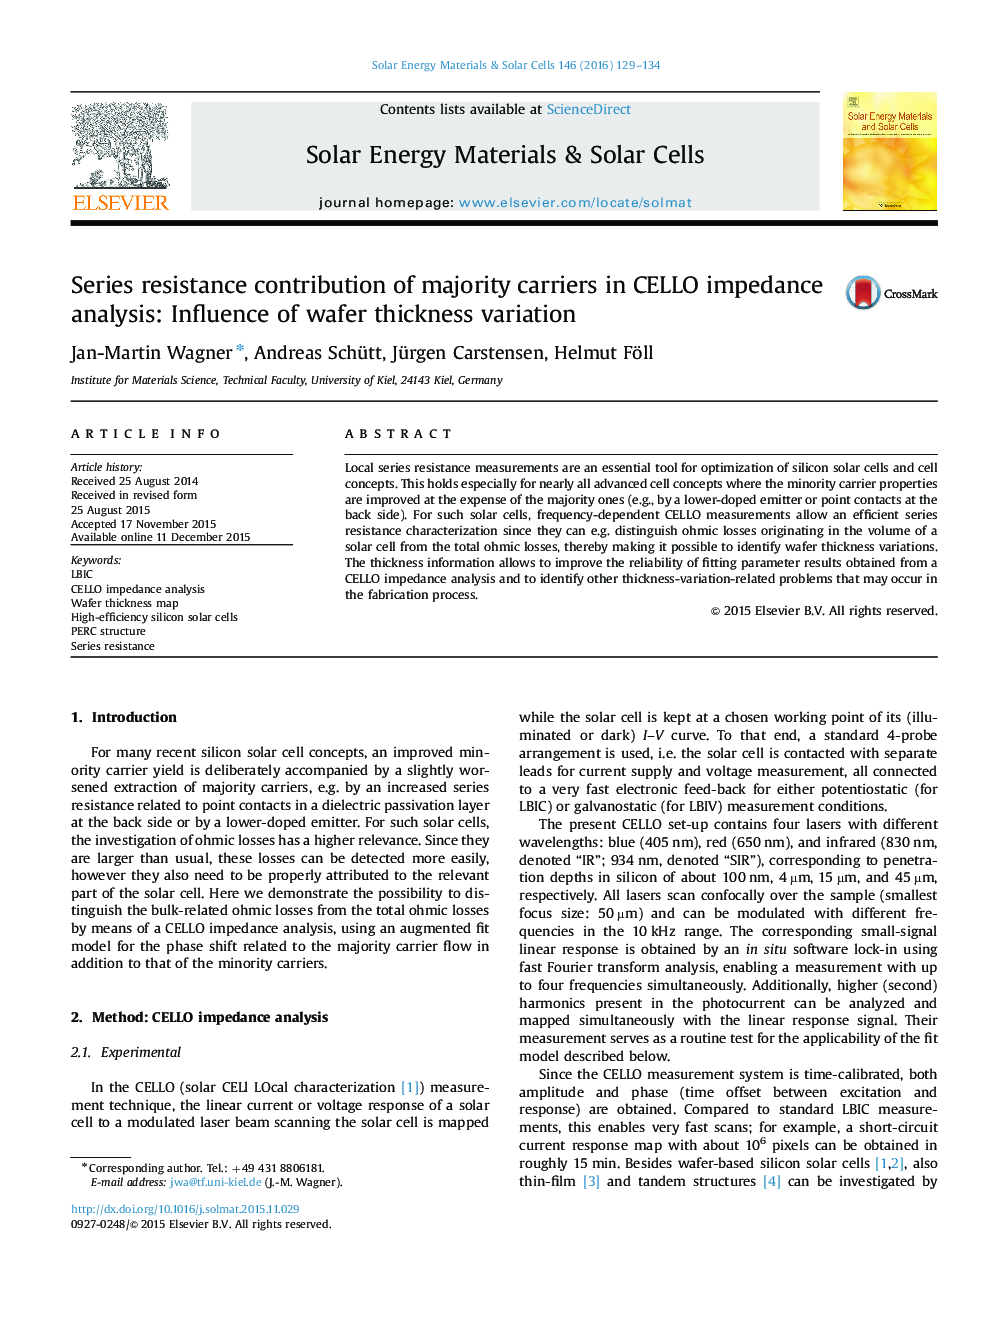 Series resistance contribution of majority carriers in CELLO impedance analysis: Influence of wafer thickness variation